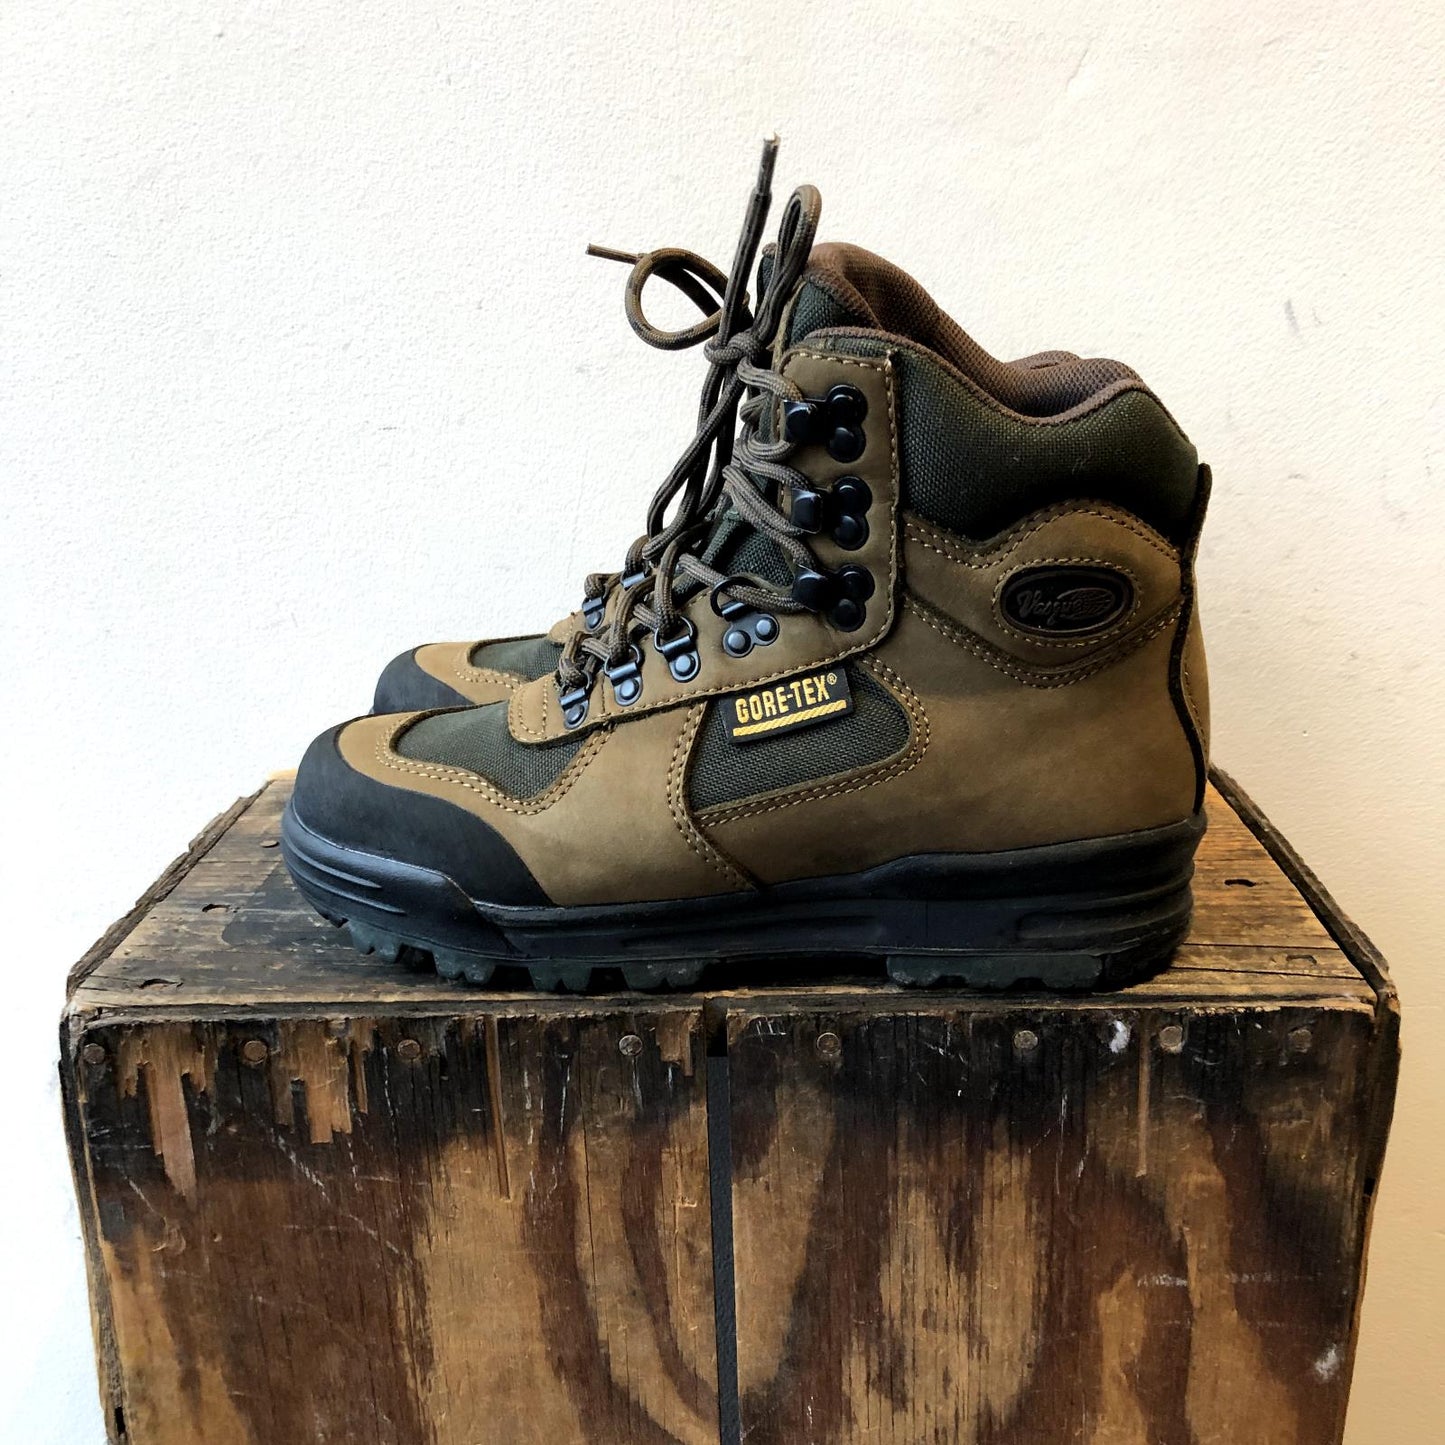 7.5 - Vasque Clarion $165 GORE-TEX Waterproof Hiking Boots NEW w/ Box 0801TH